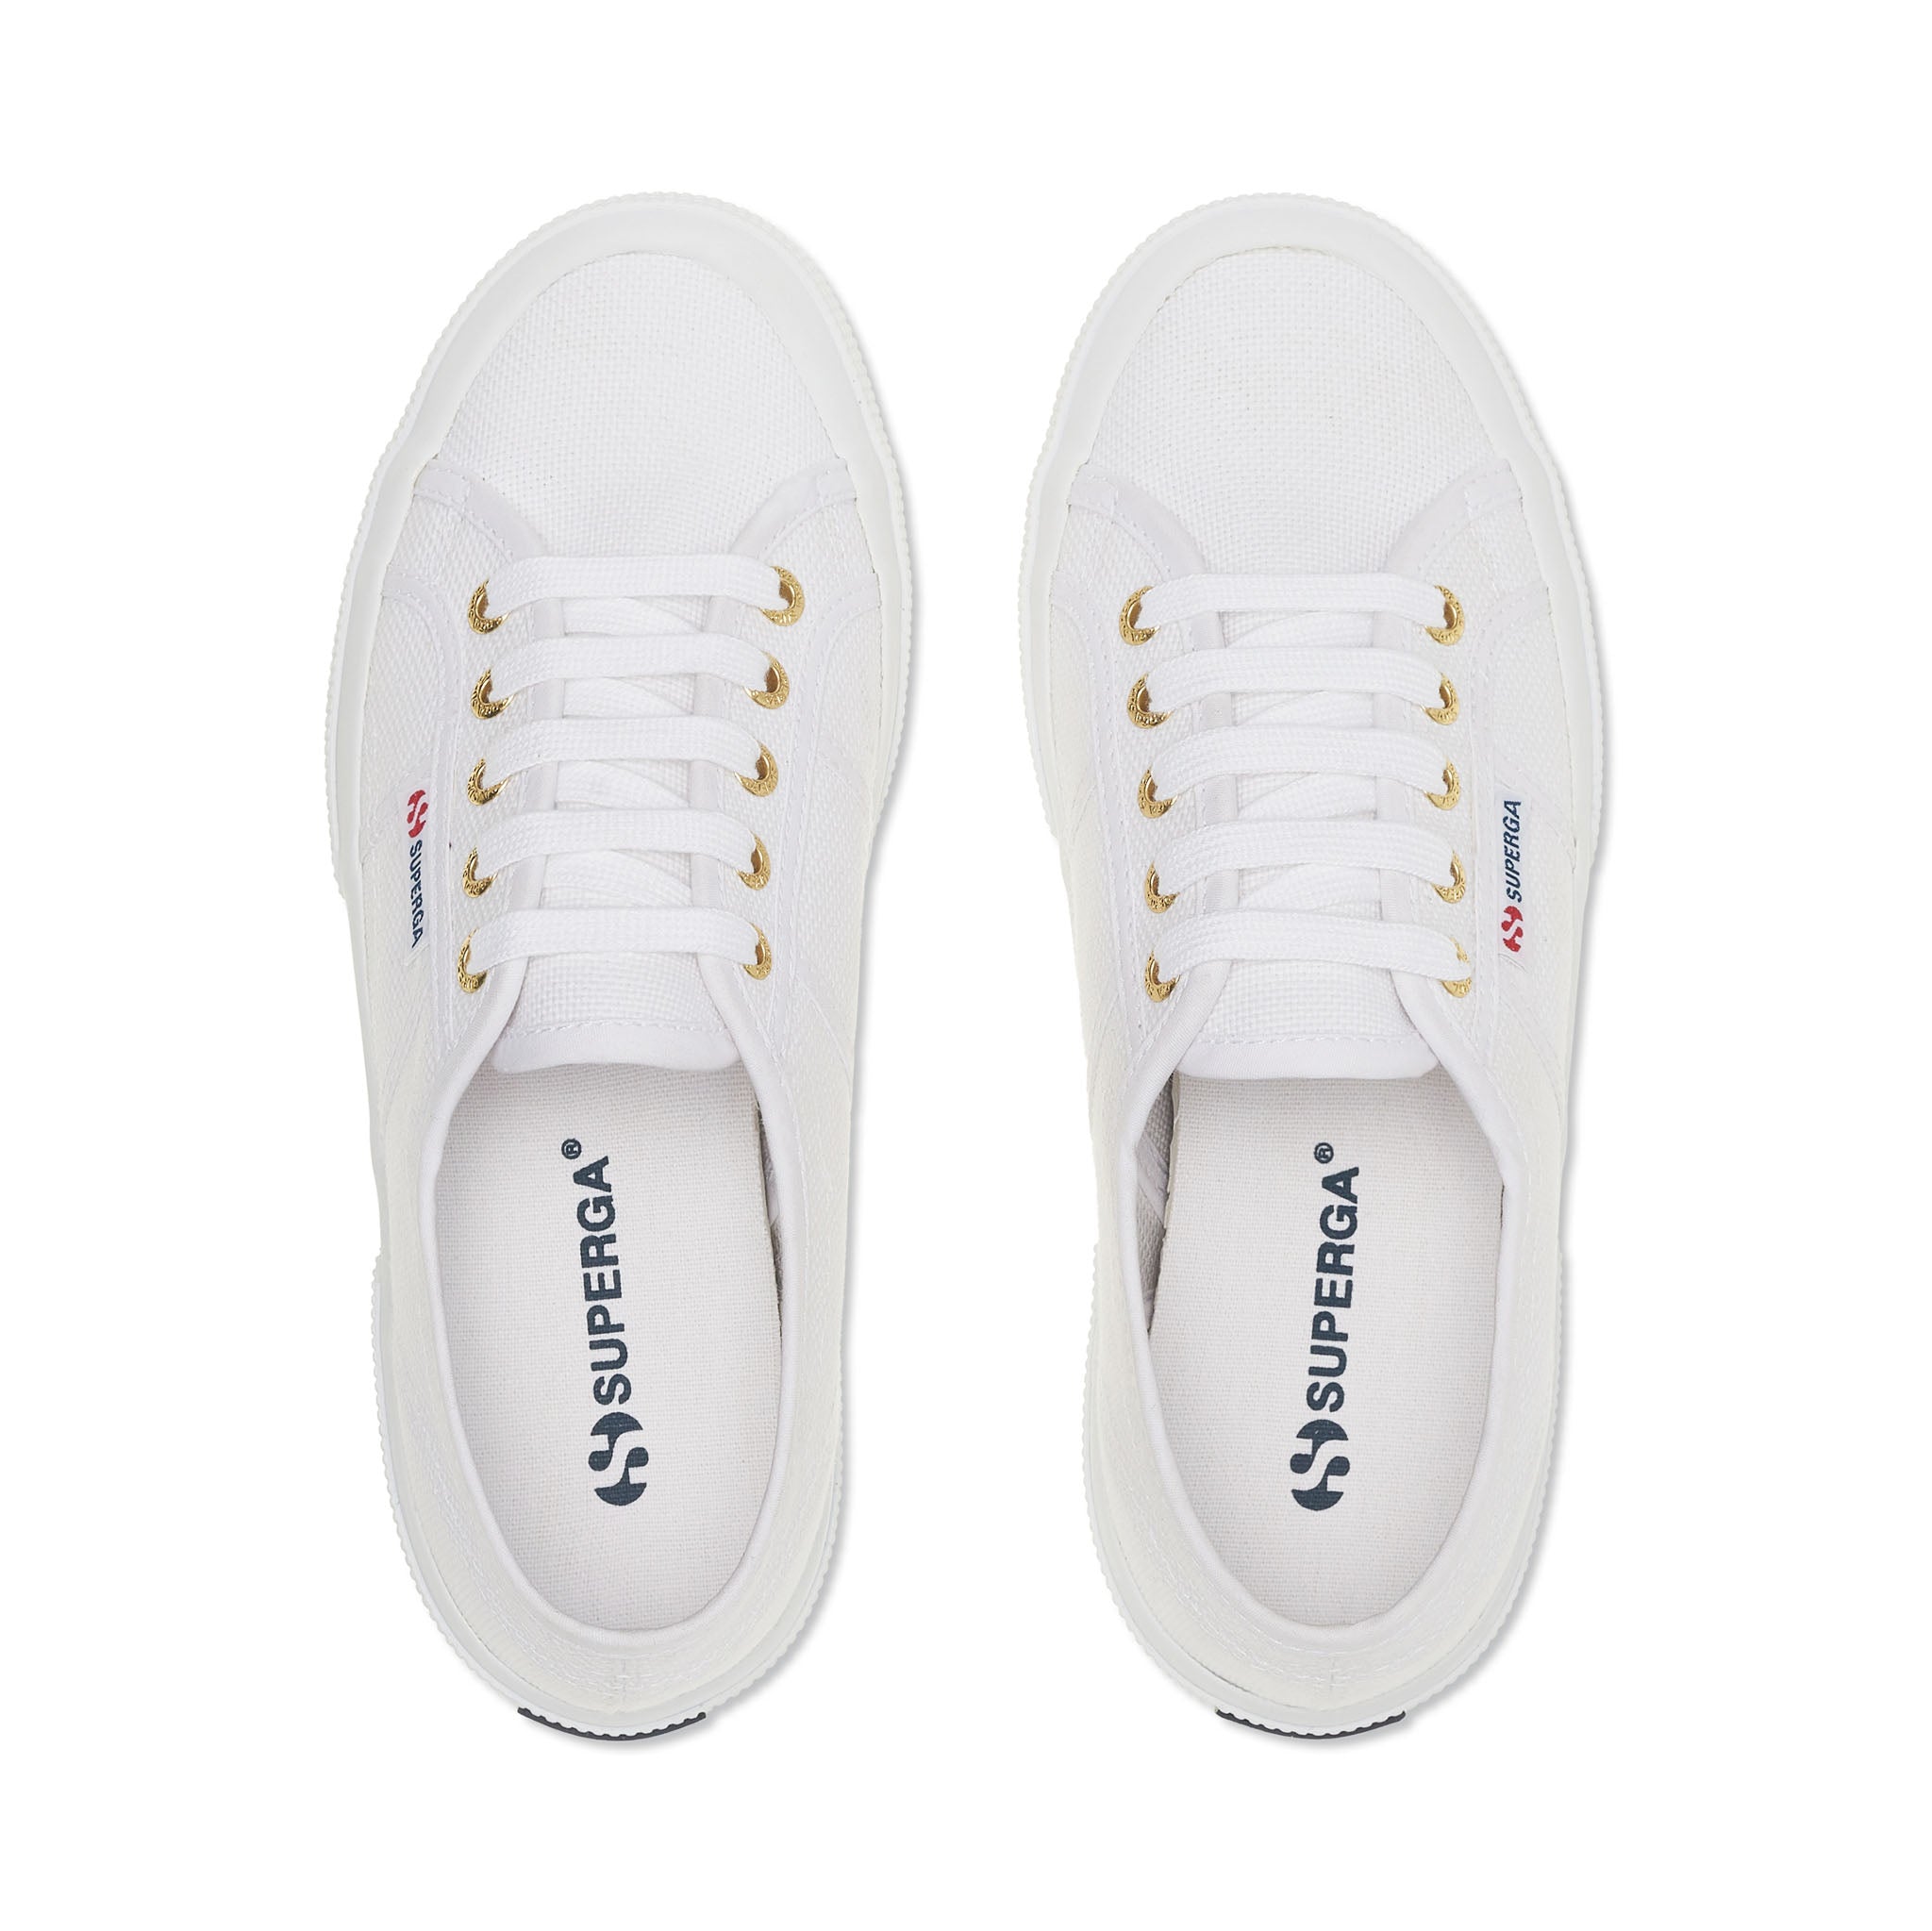 Superga 2750 Cotu Classic Sneakers - White Gold. Top view.